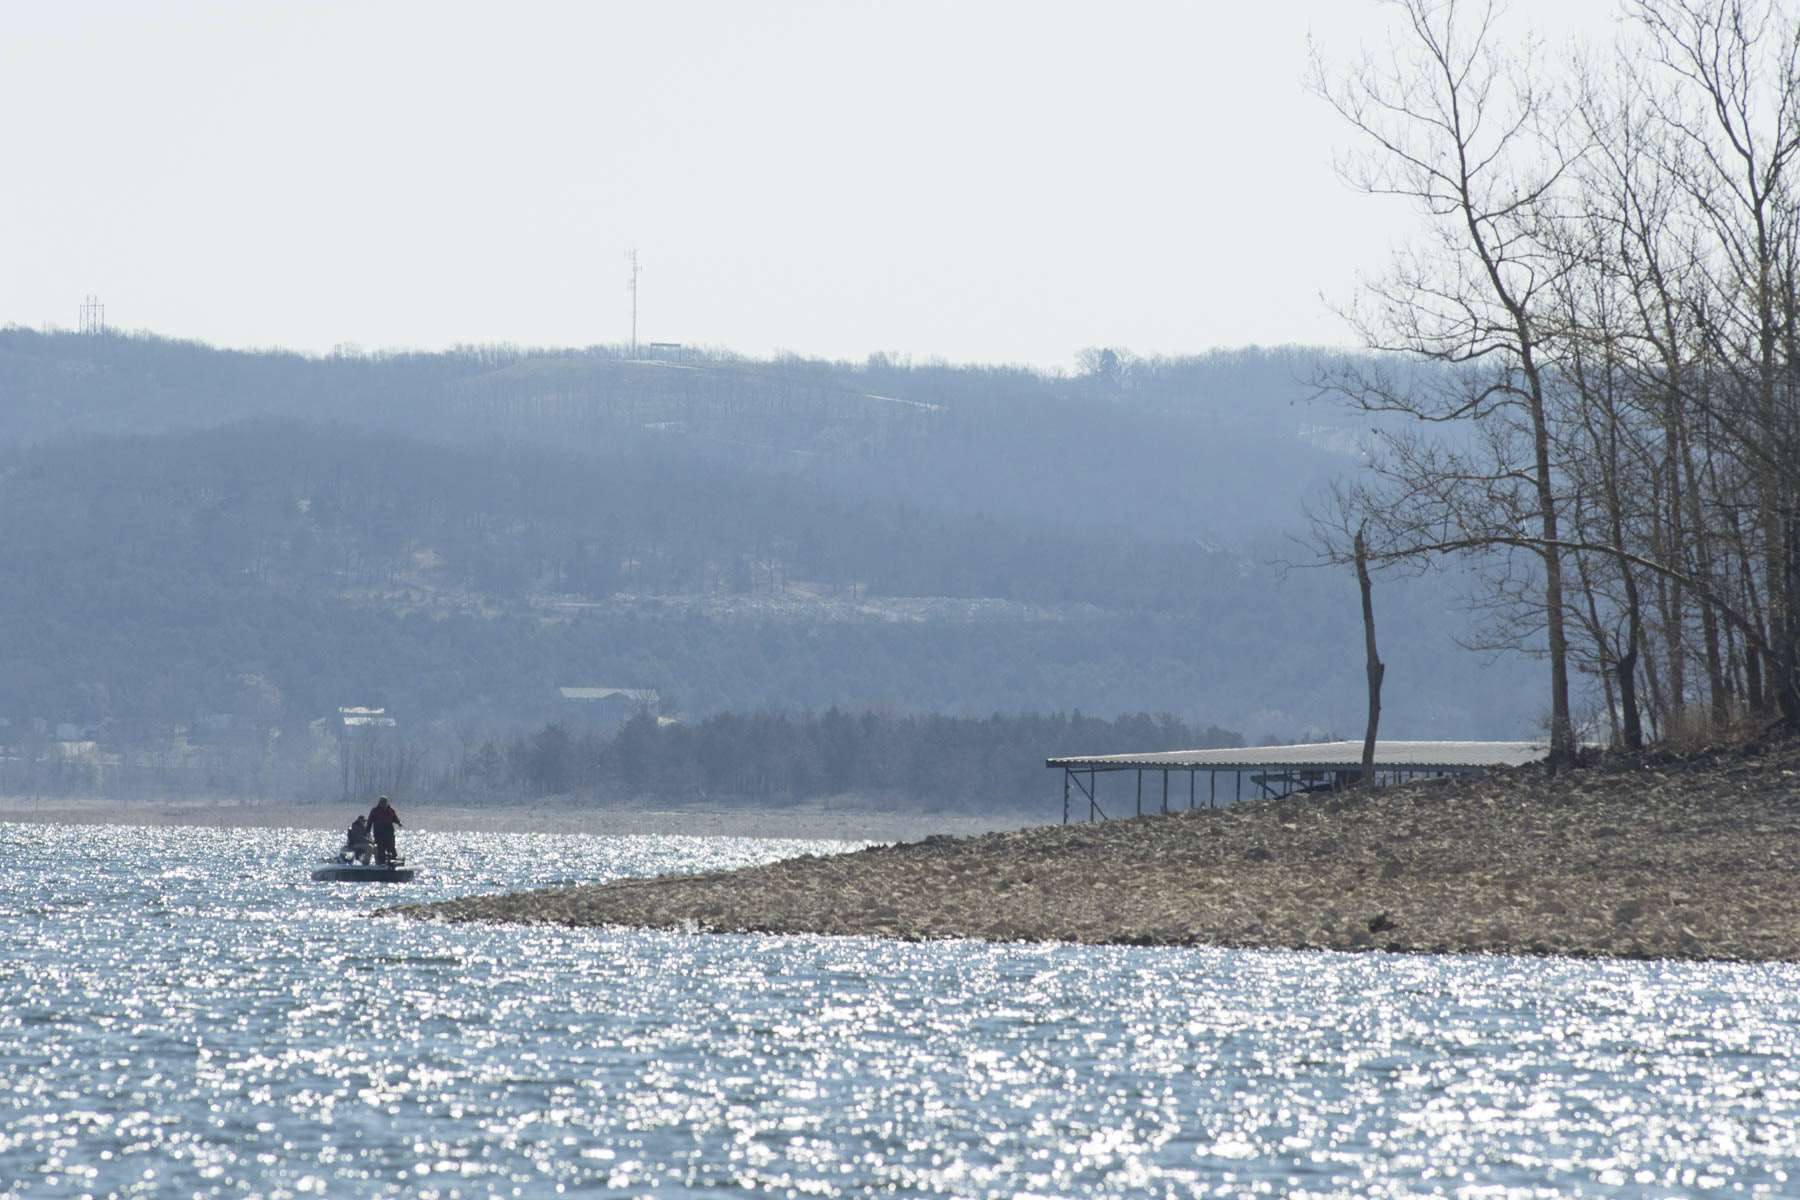 <h4>10. Table Rock Lake, Arkansas/Missouri </h4> [43,100 acres] <br>Table Rock is the fishery upon which bass fishing in the Show Me State is built. It took a 20-3 limit in a Phoenix Bass Fishing League event in late April to win here, and single catches on the Big Bass Tour have consistently been heavier than 5 pounds apiece. Thatâs the kind of mid-American consistency anglers everywhere love.